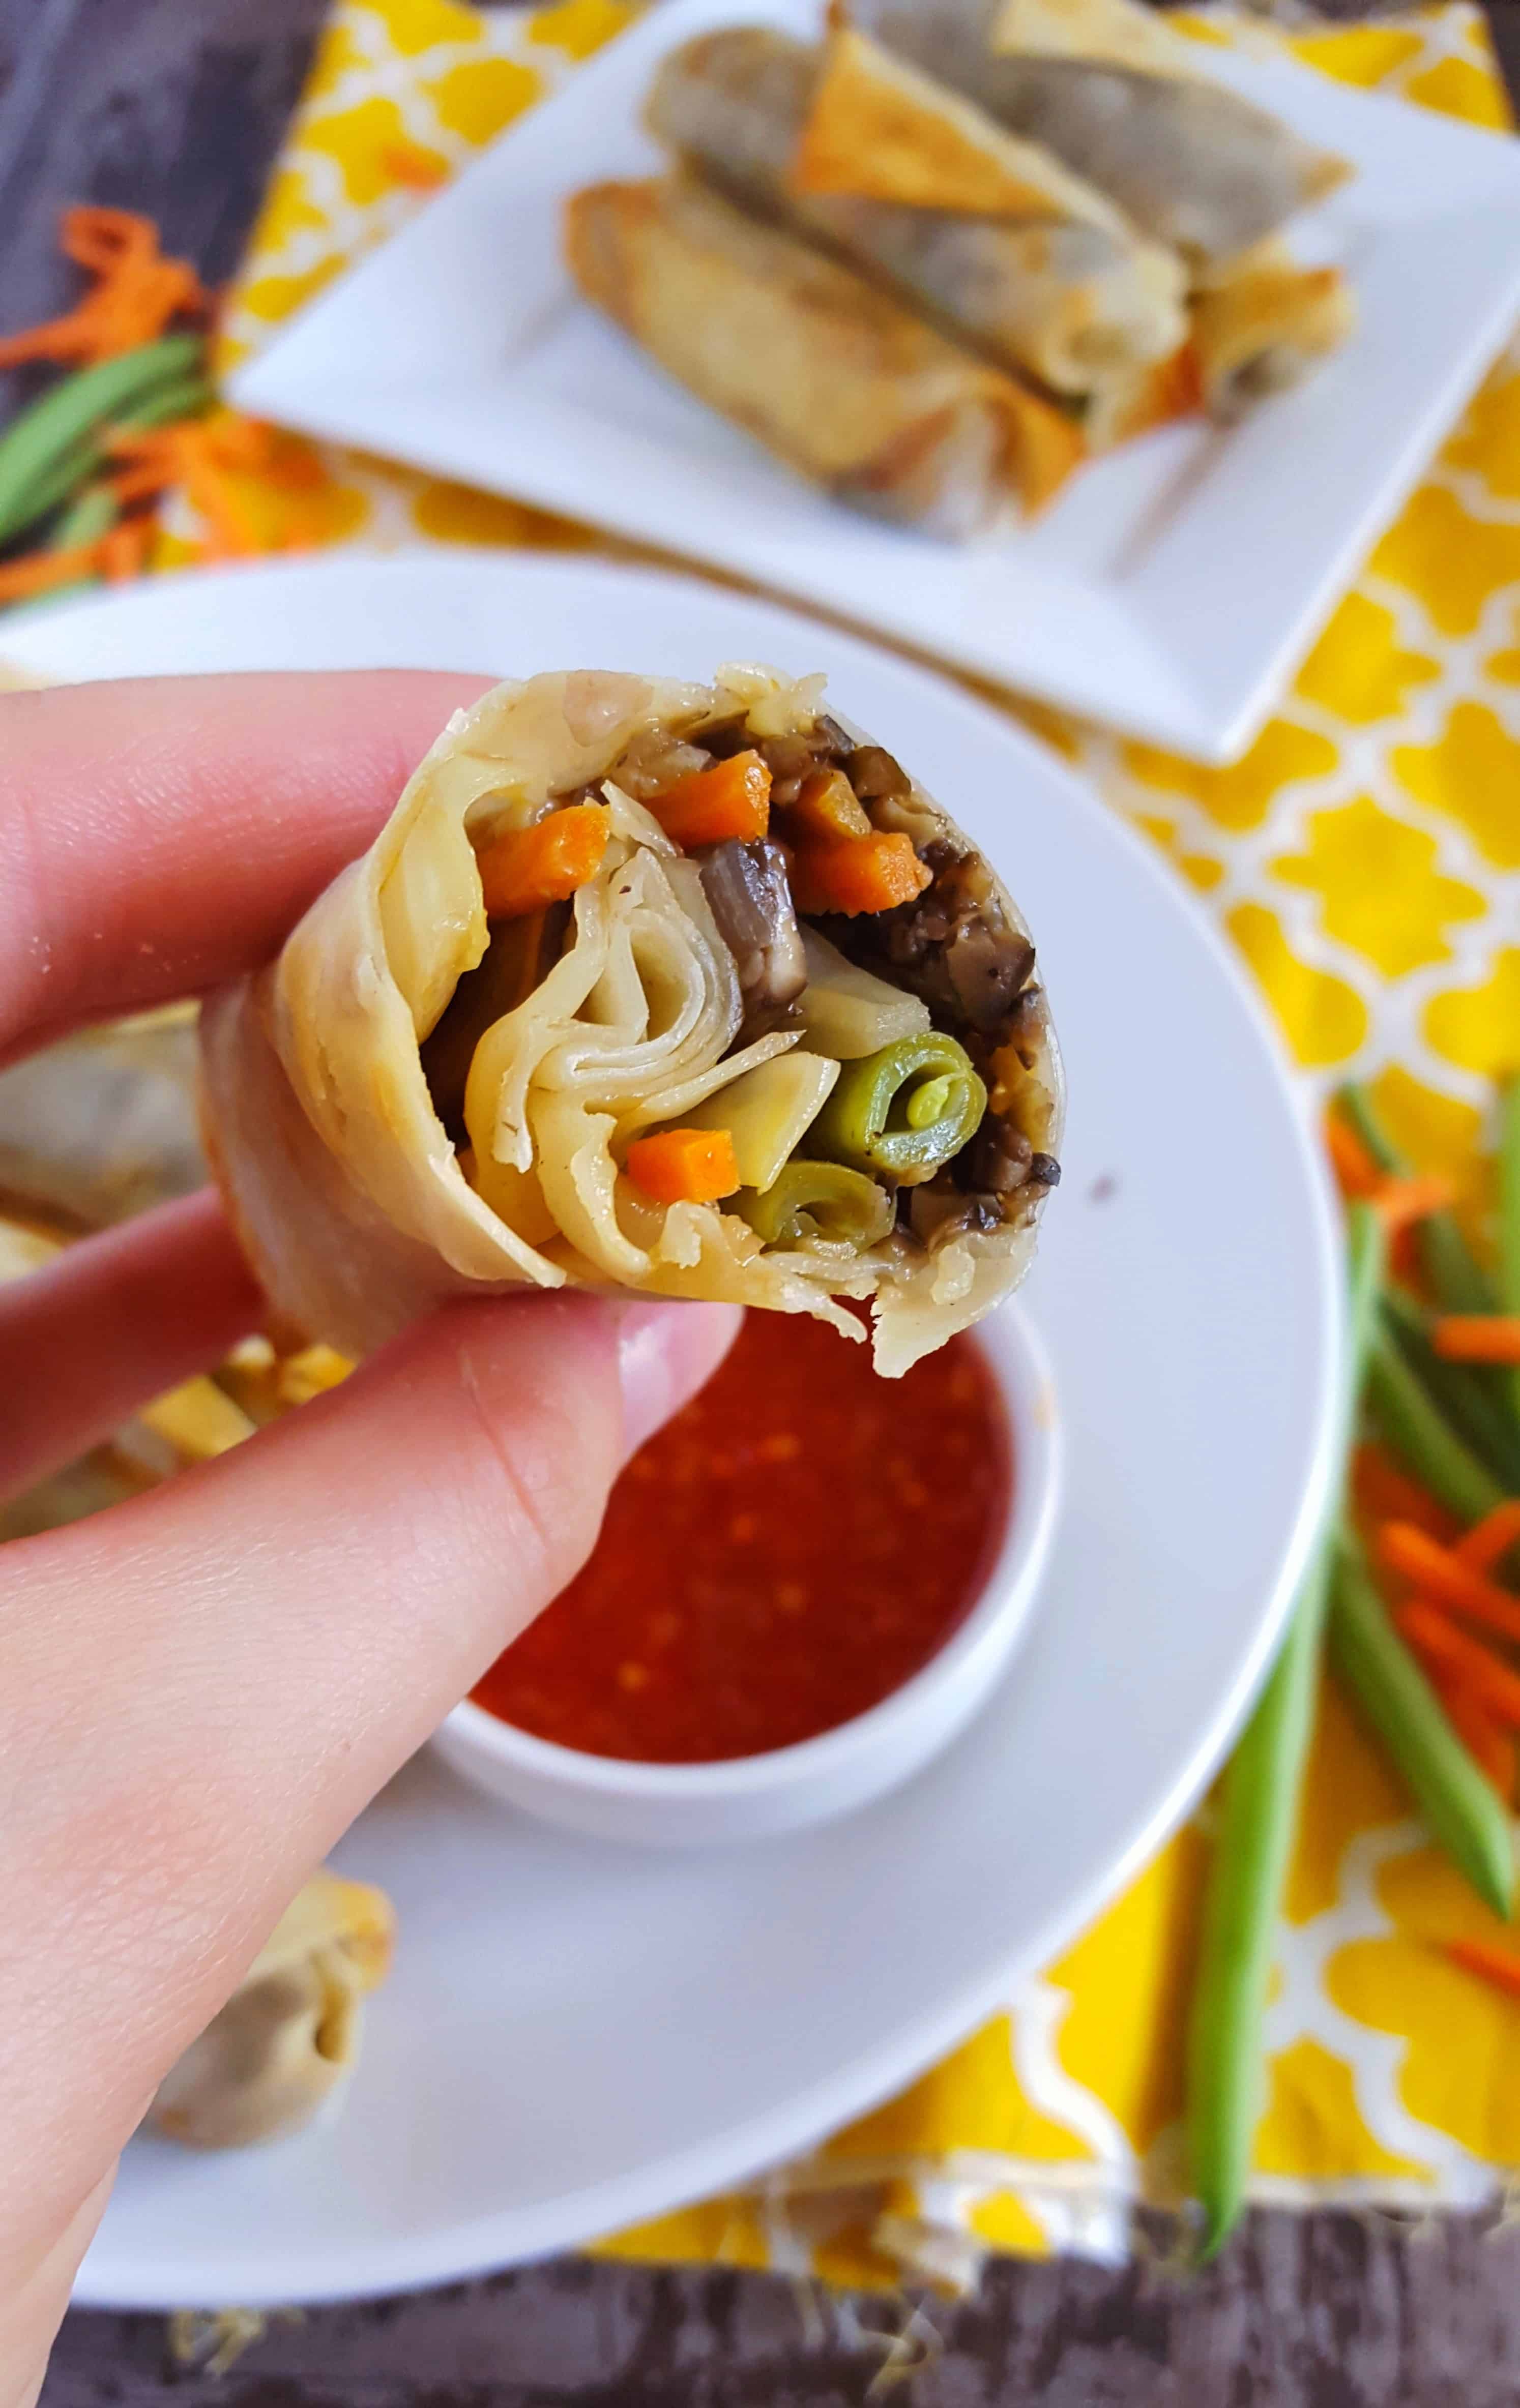 Baked veggie spring rolls with spicy black olive tempanade